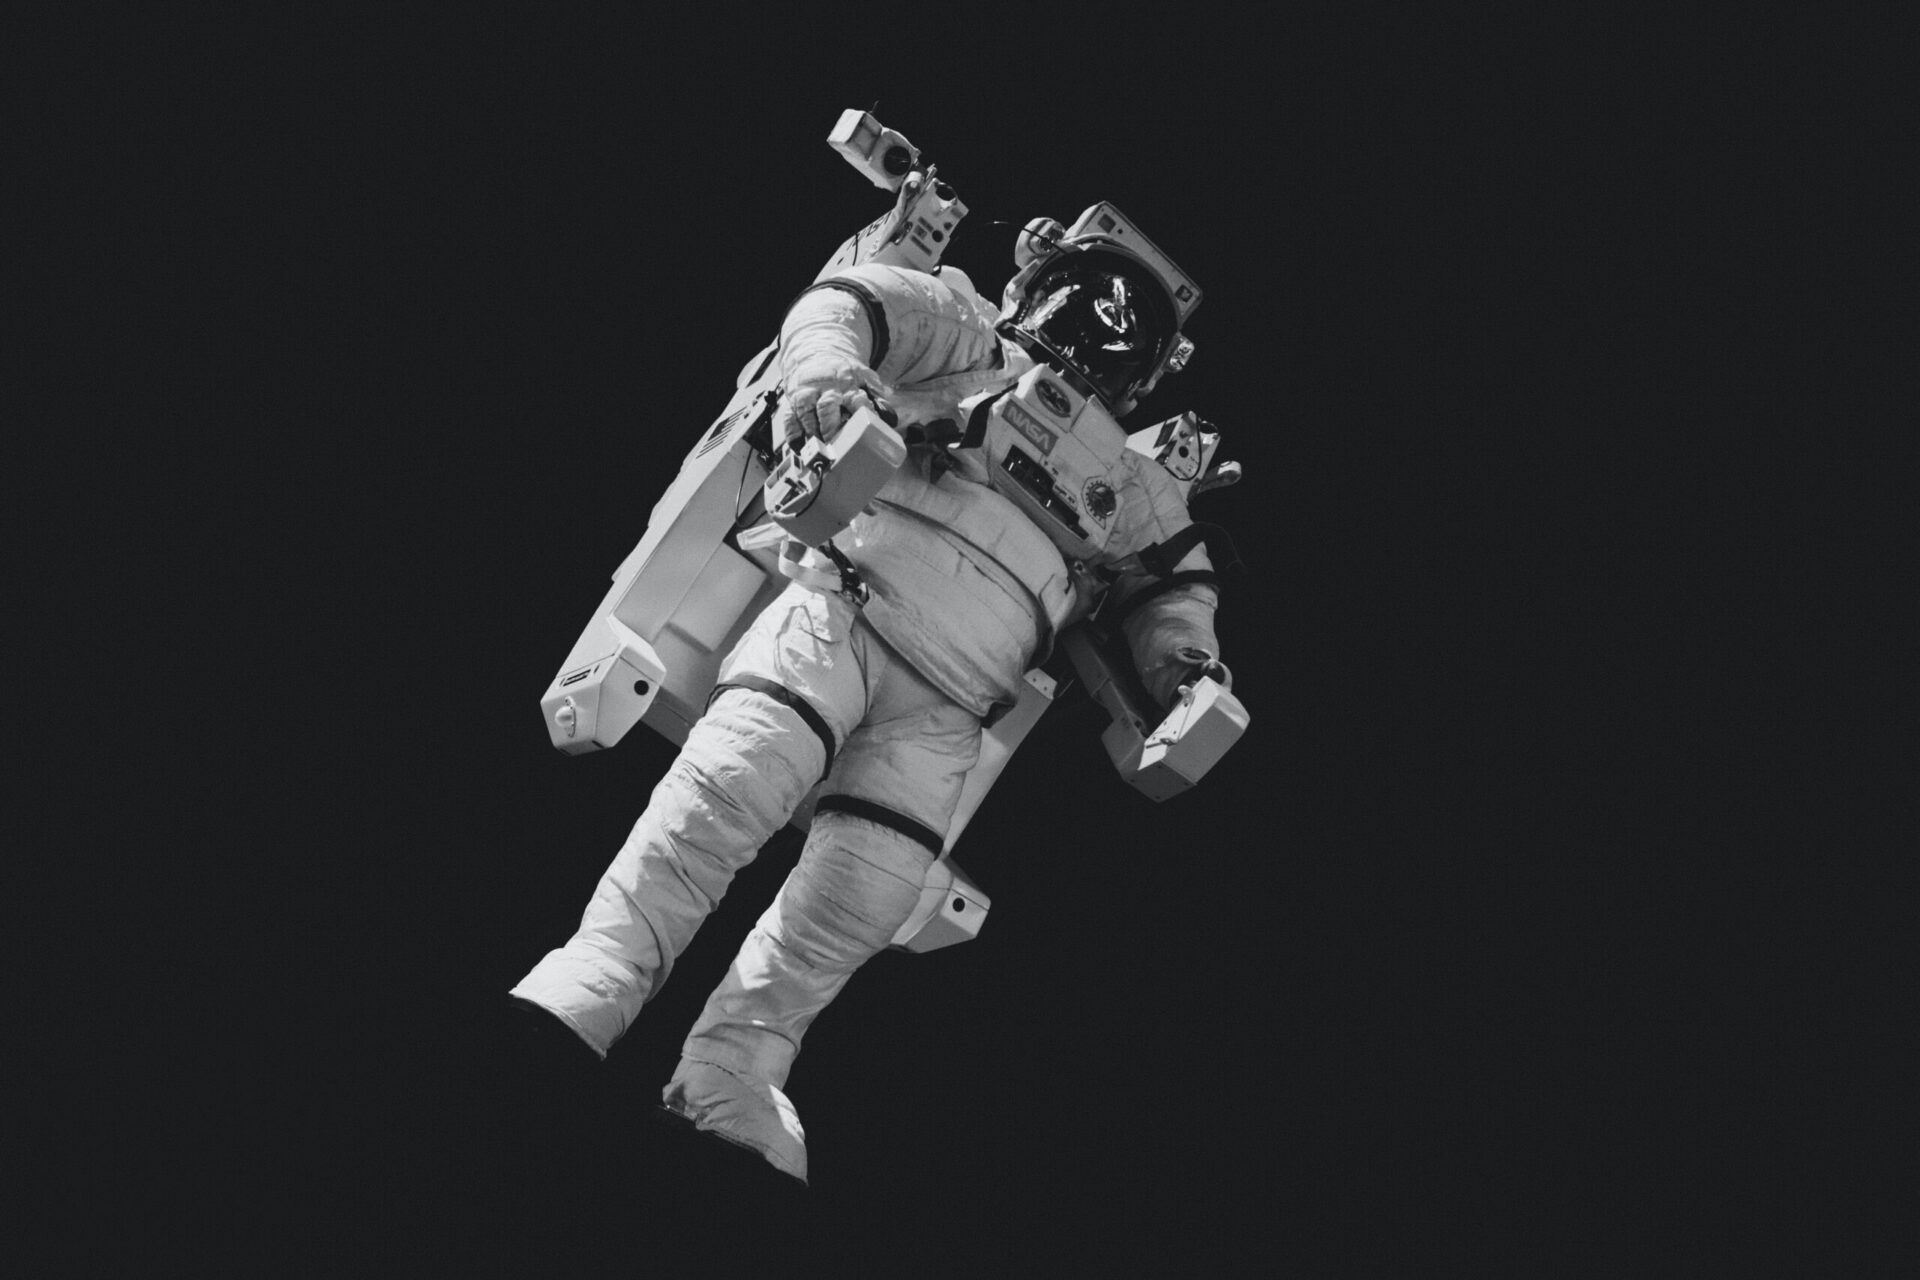 An astronaut in a spacesuit is suspended in space against a black background.